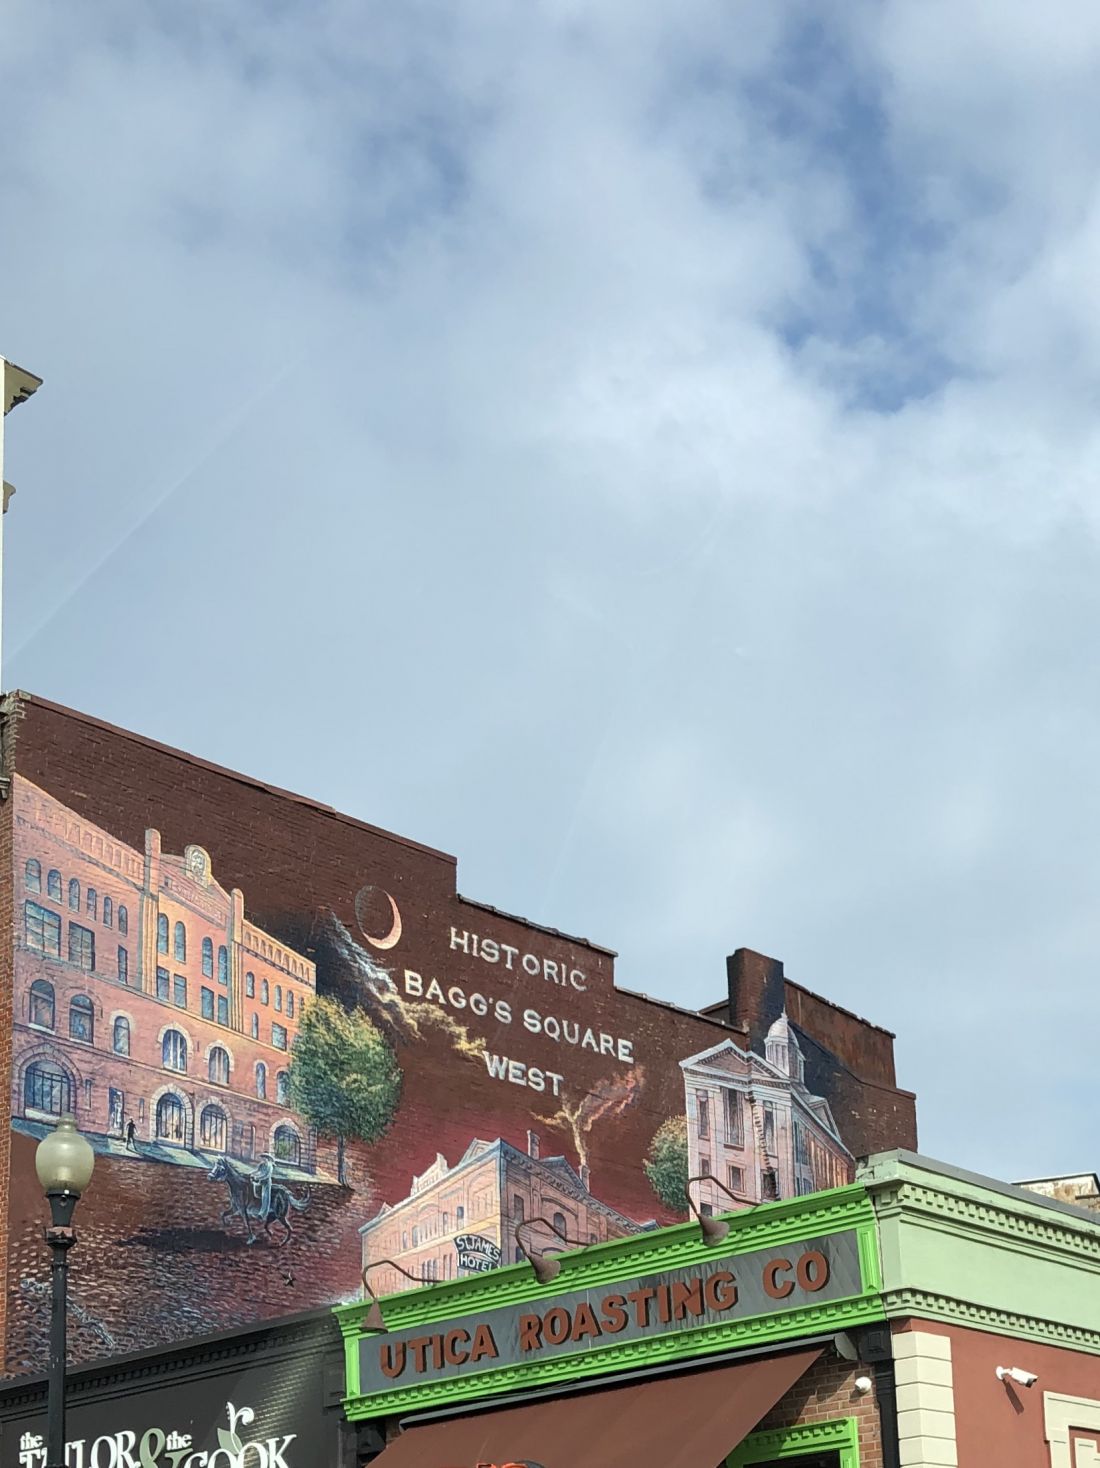 Historic Baggs Square West Mural painted images of 3 historic buildings in Utica